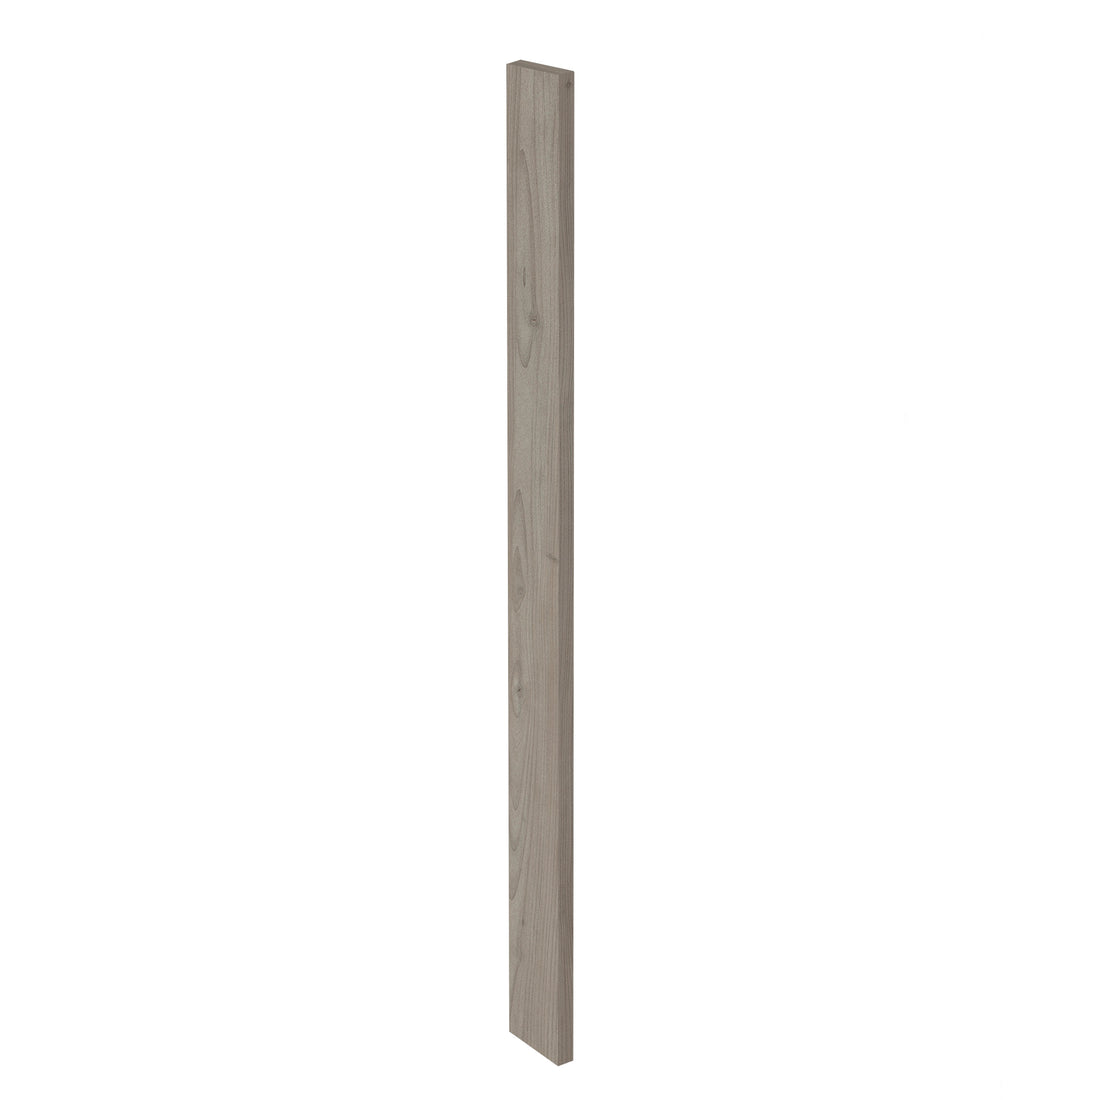 Grey Nordic Slab Style Kitchen Cabinet Filler (3 in W x 0.75 in D x 42 in H) -  Pro-Edge HD